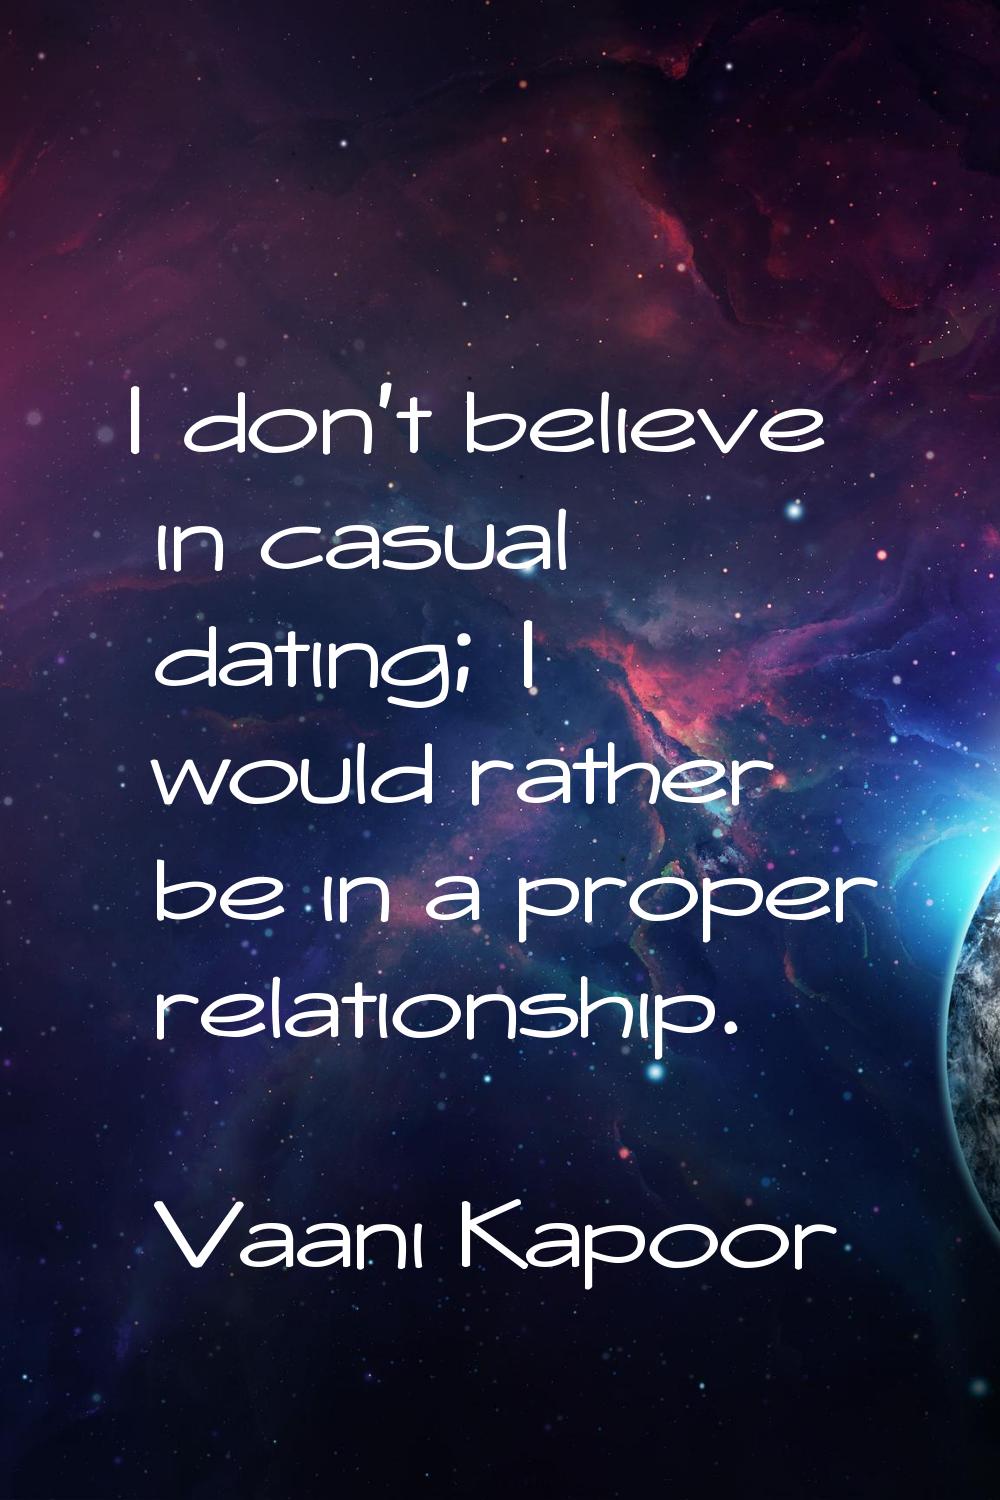 I don't believe in casual dating; I would rather be in a proper relationship.